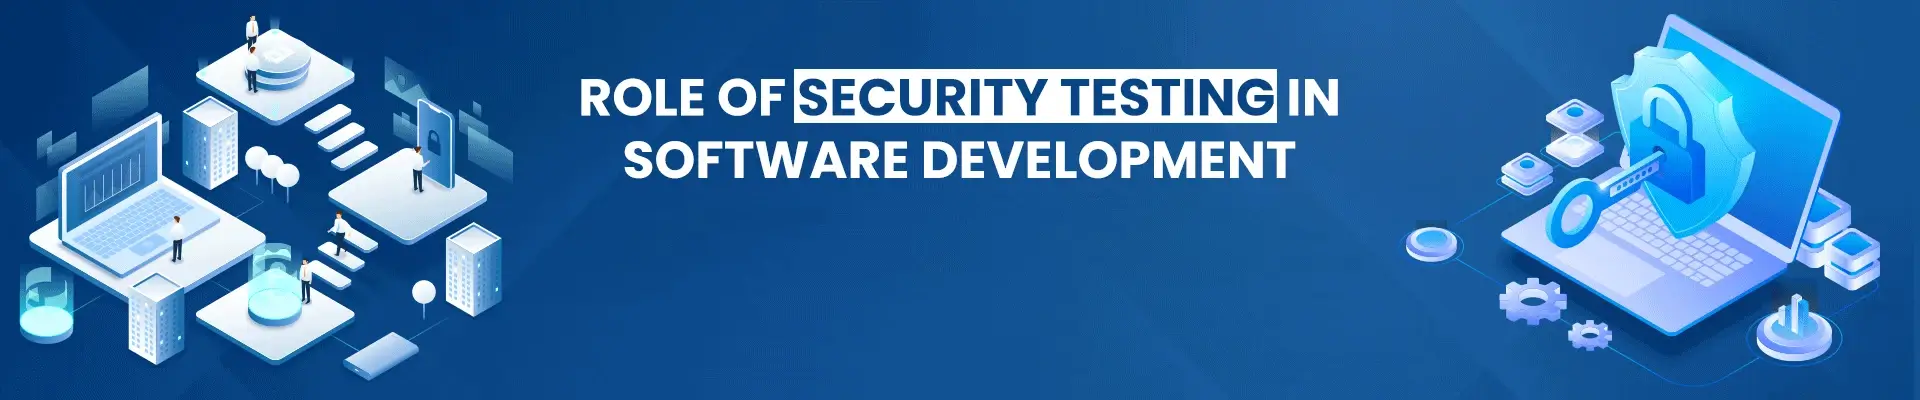 What’s the role of security testing in software development?